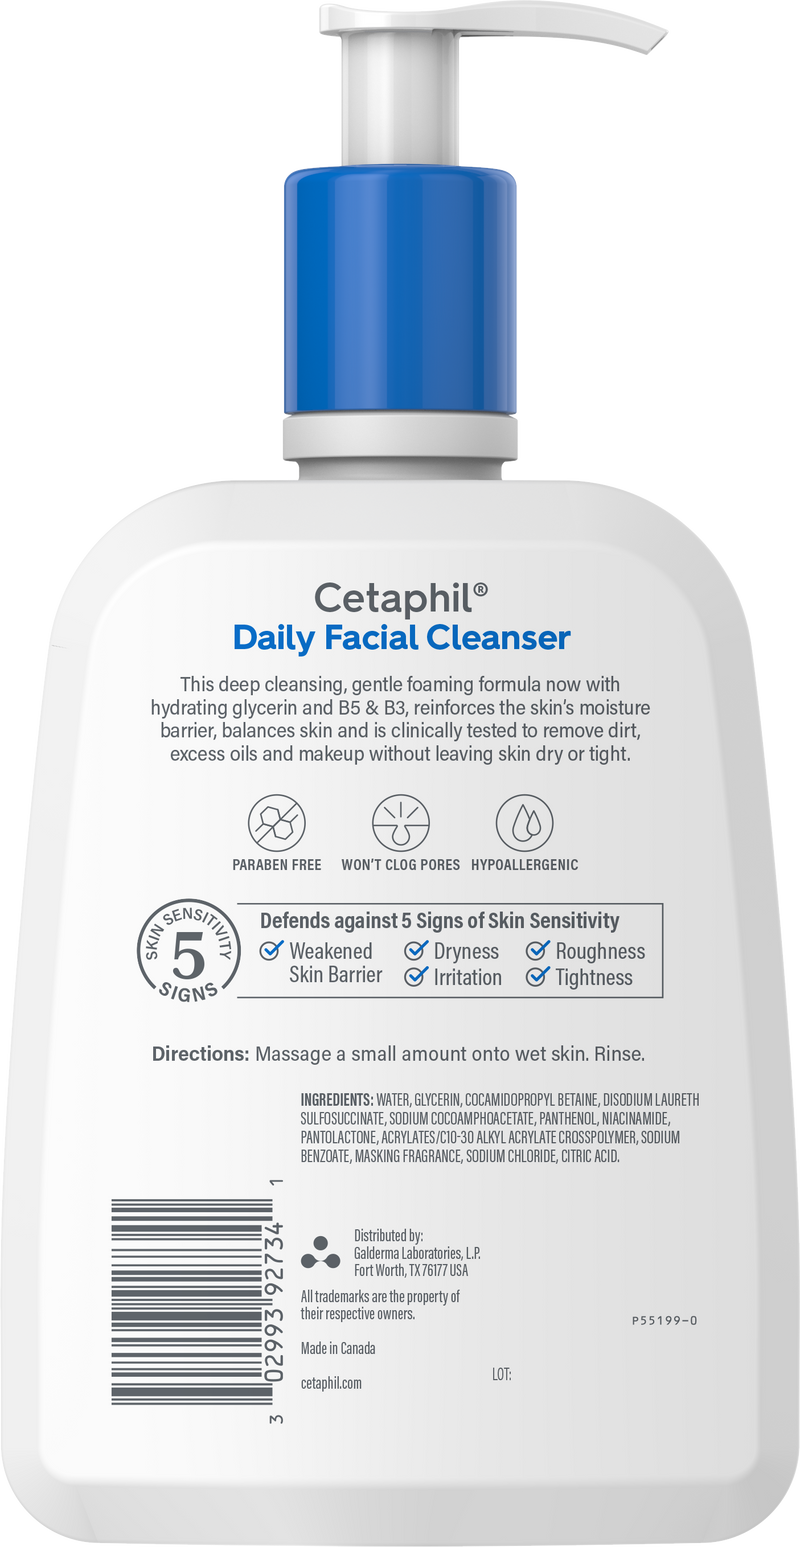 Cetaphil Daily Facial Cleanser Lotion for Combination to Oily, Sensitive Skin, 16 fl oz